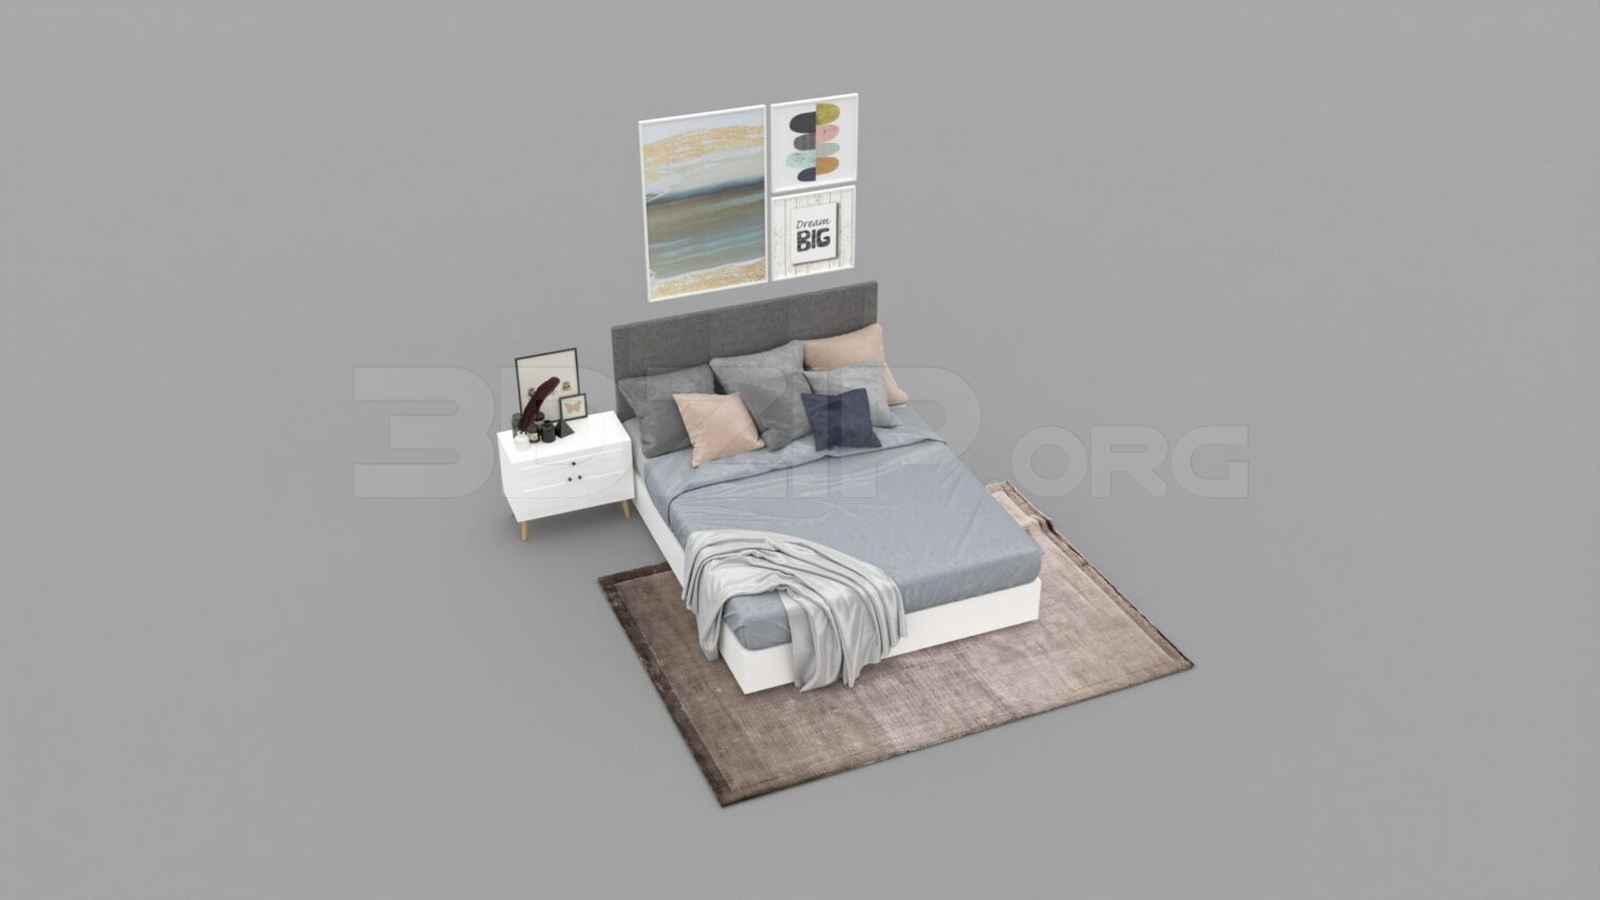 780. Download Free Bed Model By Tien Trung